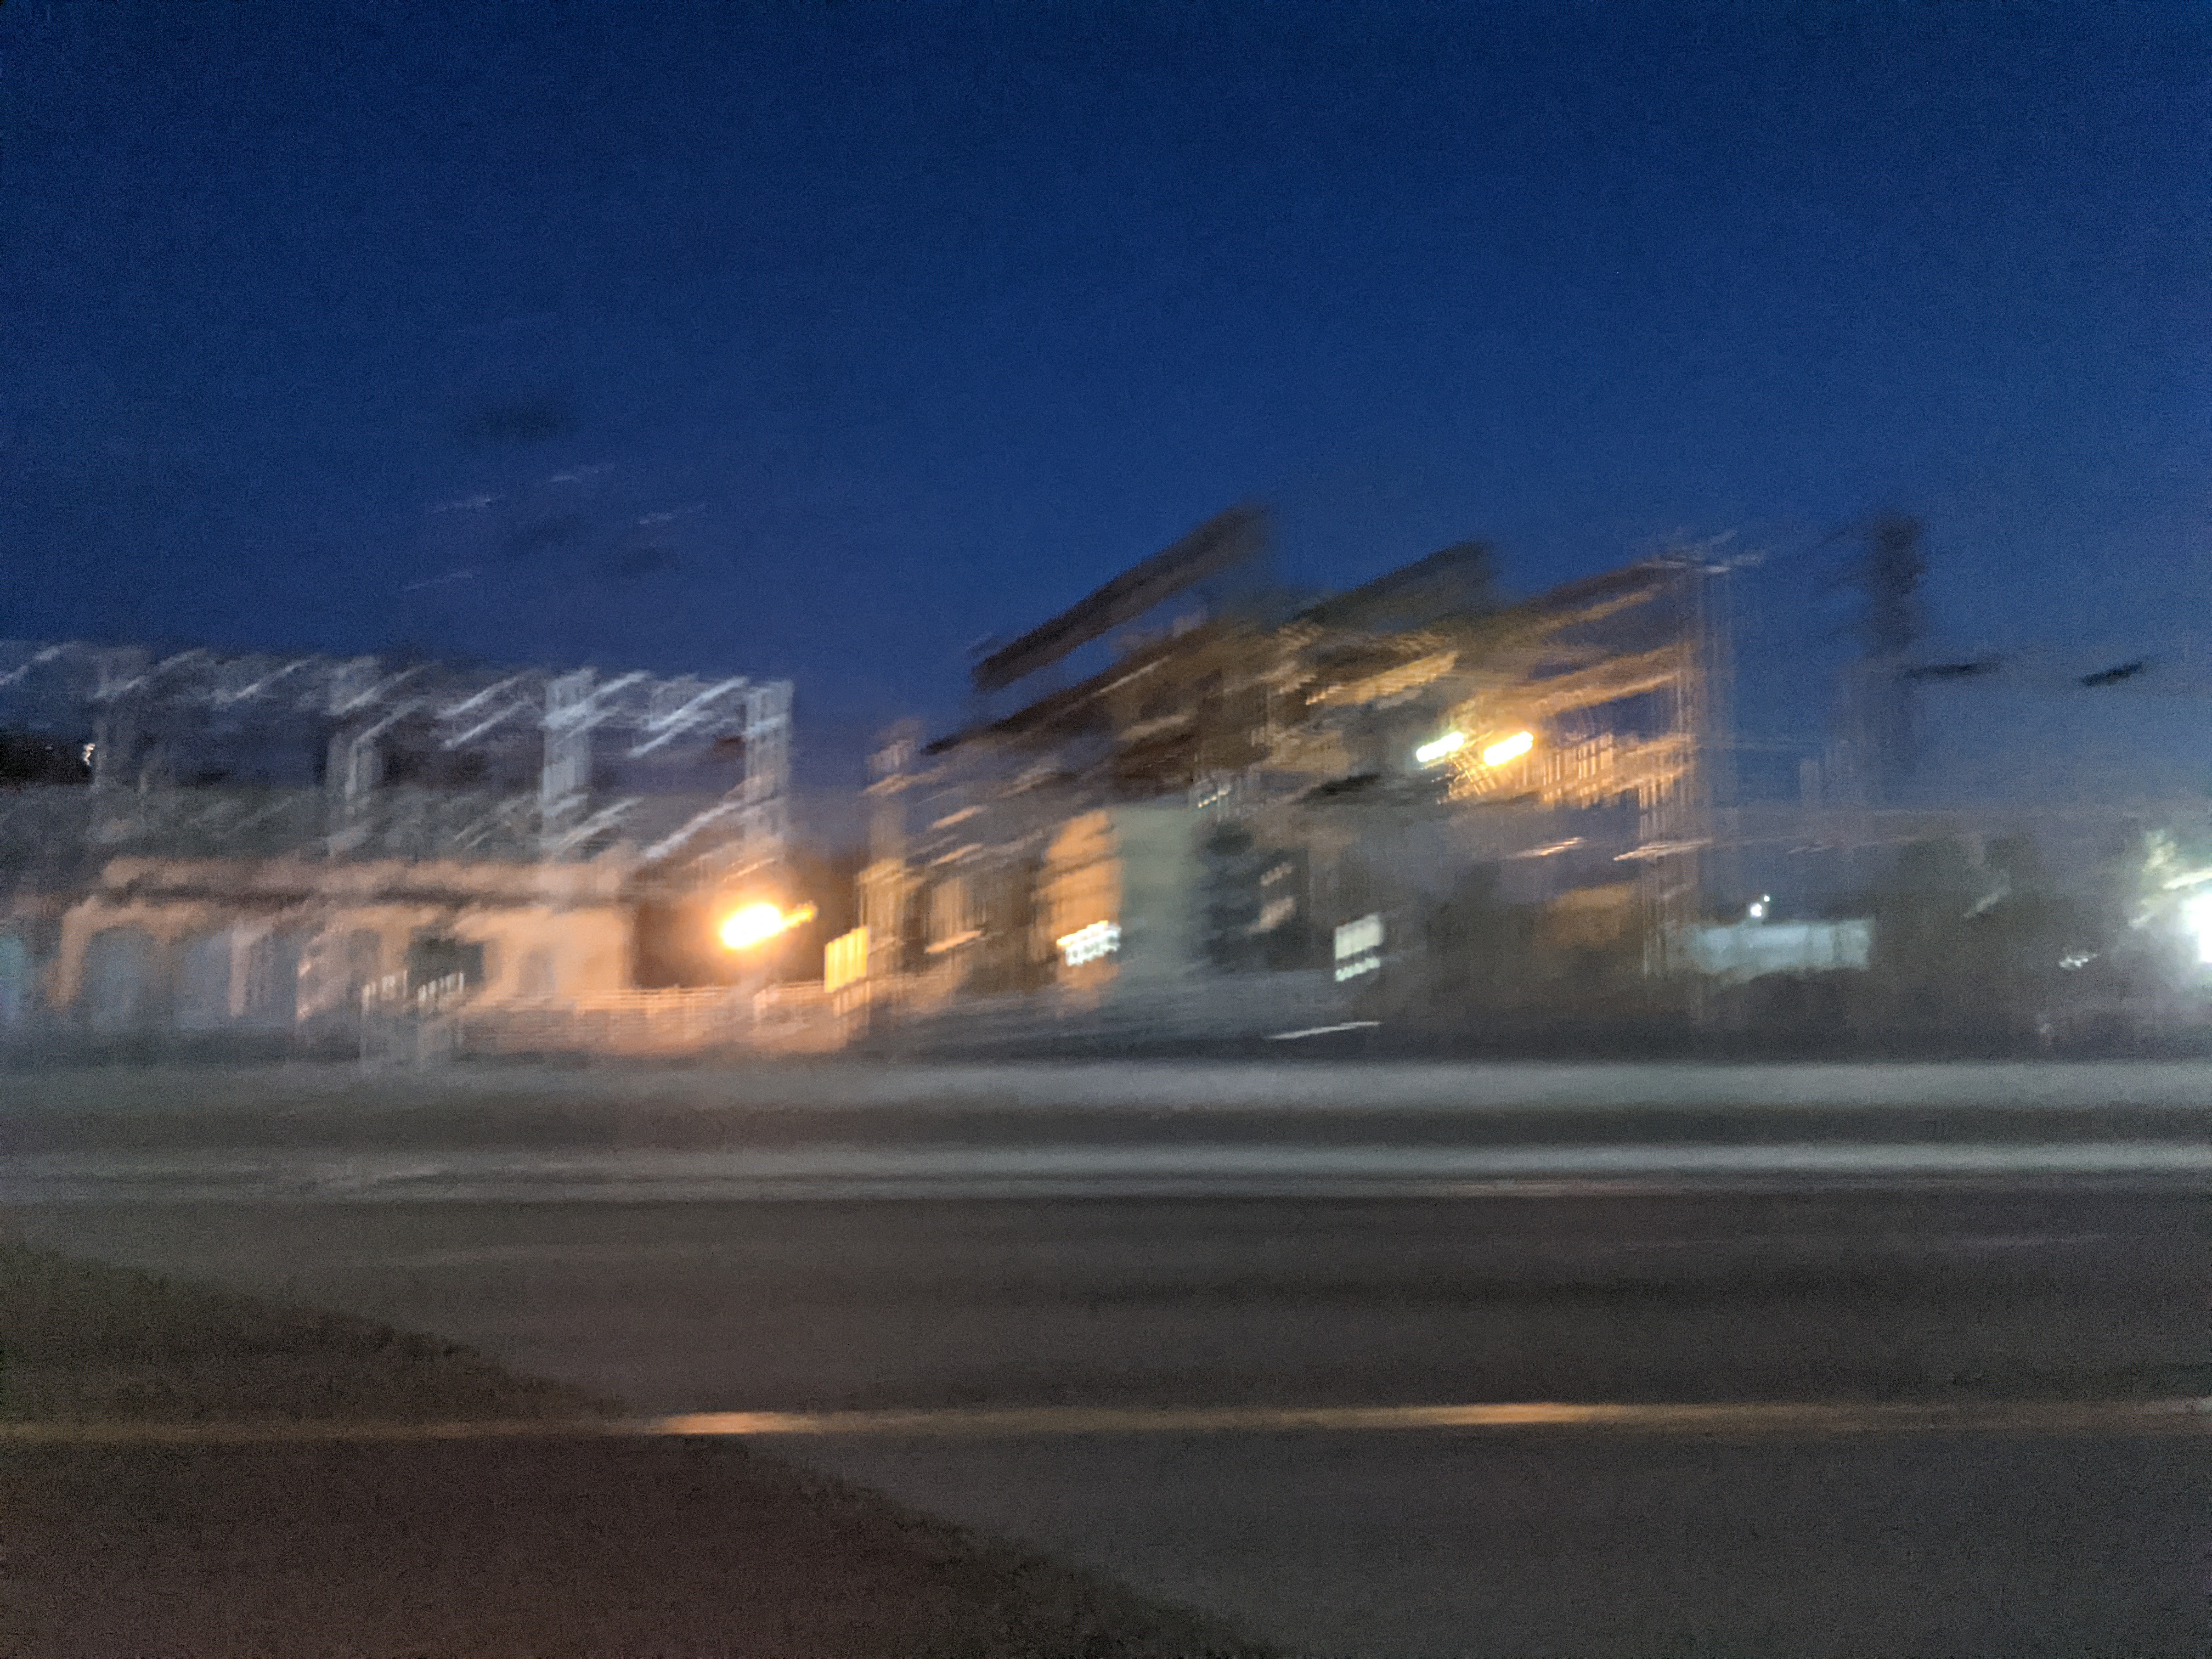 A motion blurred photo of a brightly lit roadside power station under the clear evening sky, with the shadow of a car partially visible on the road.